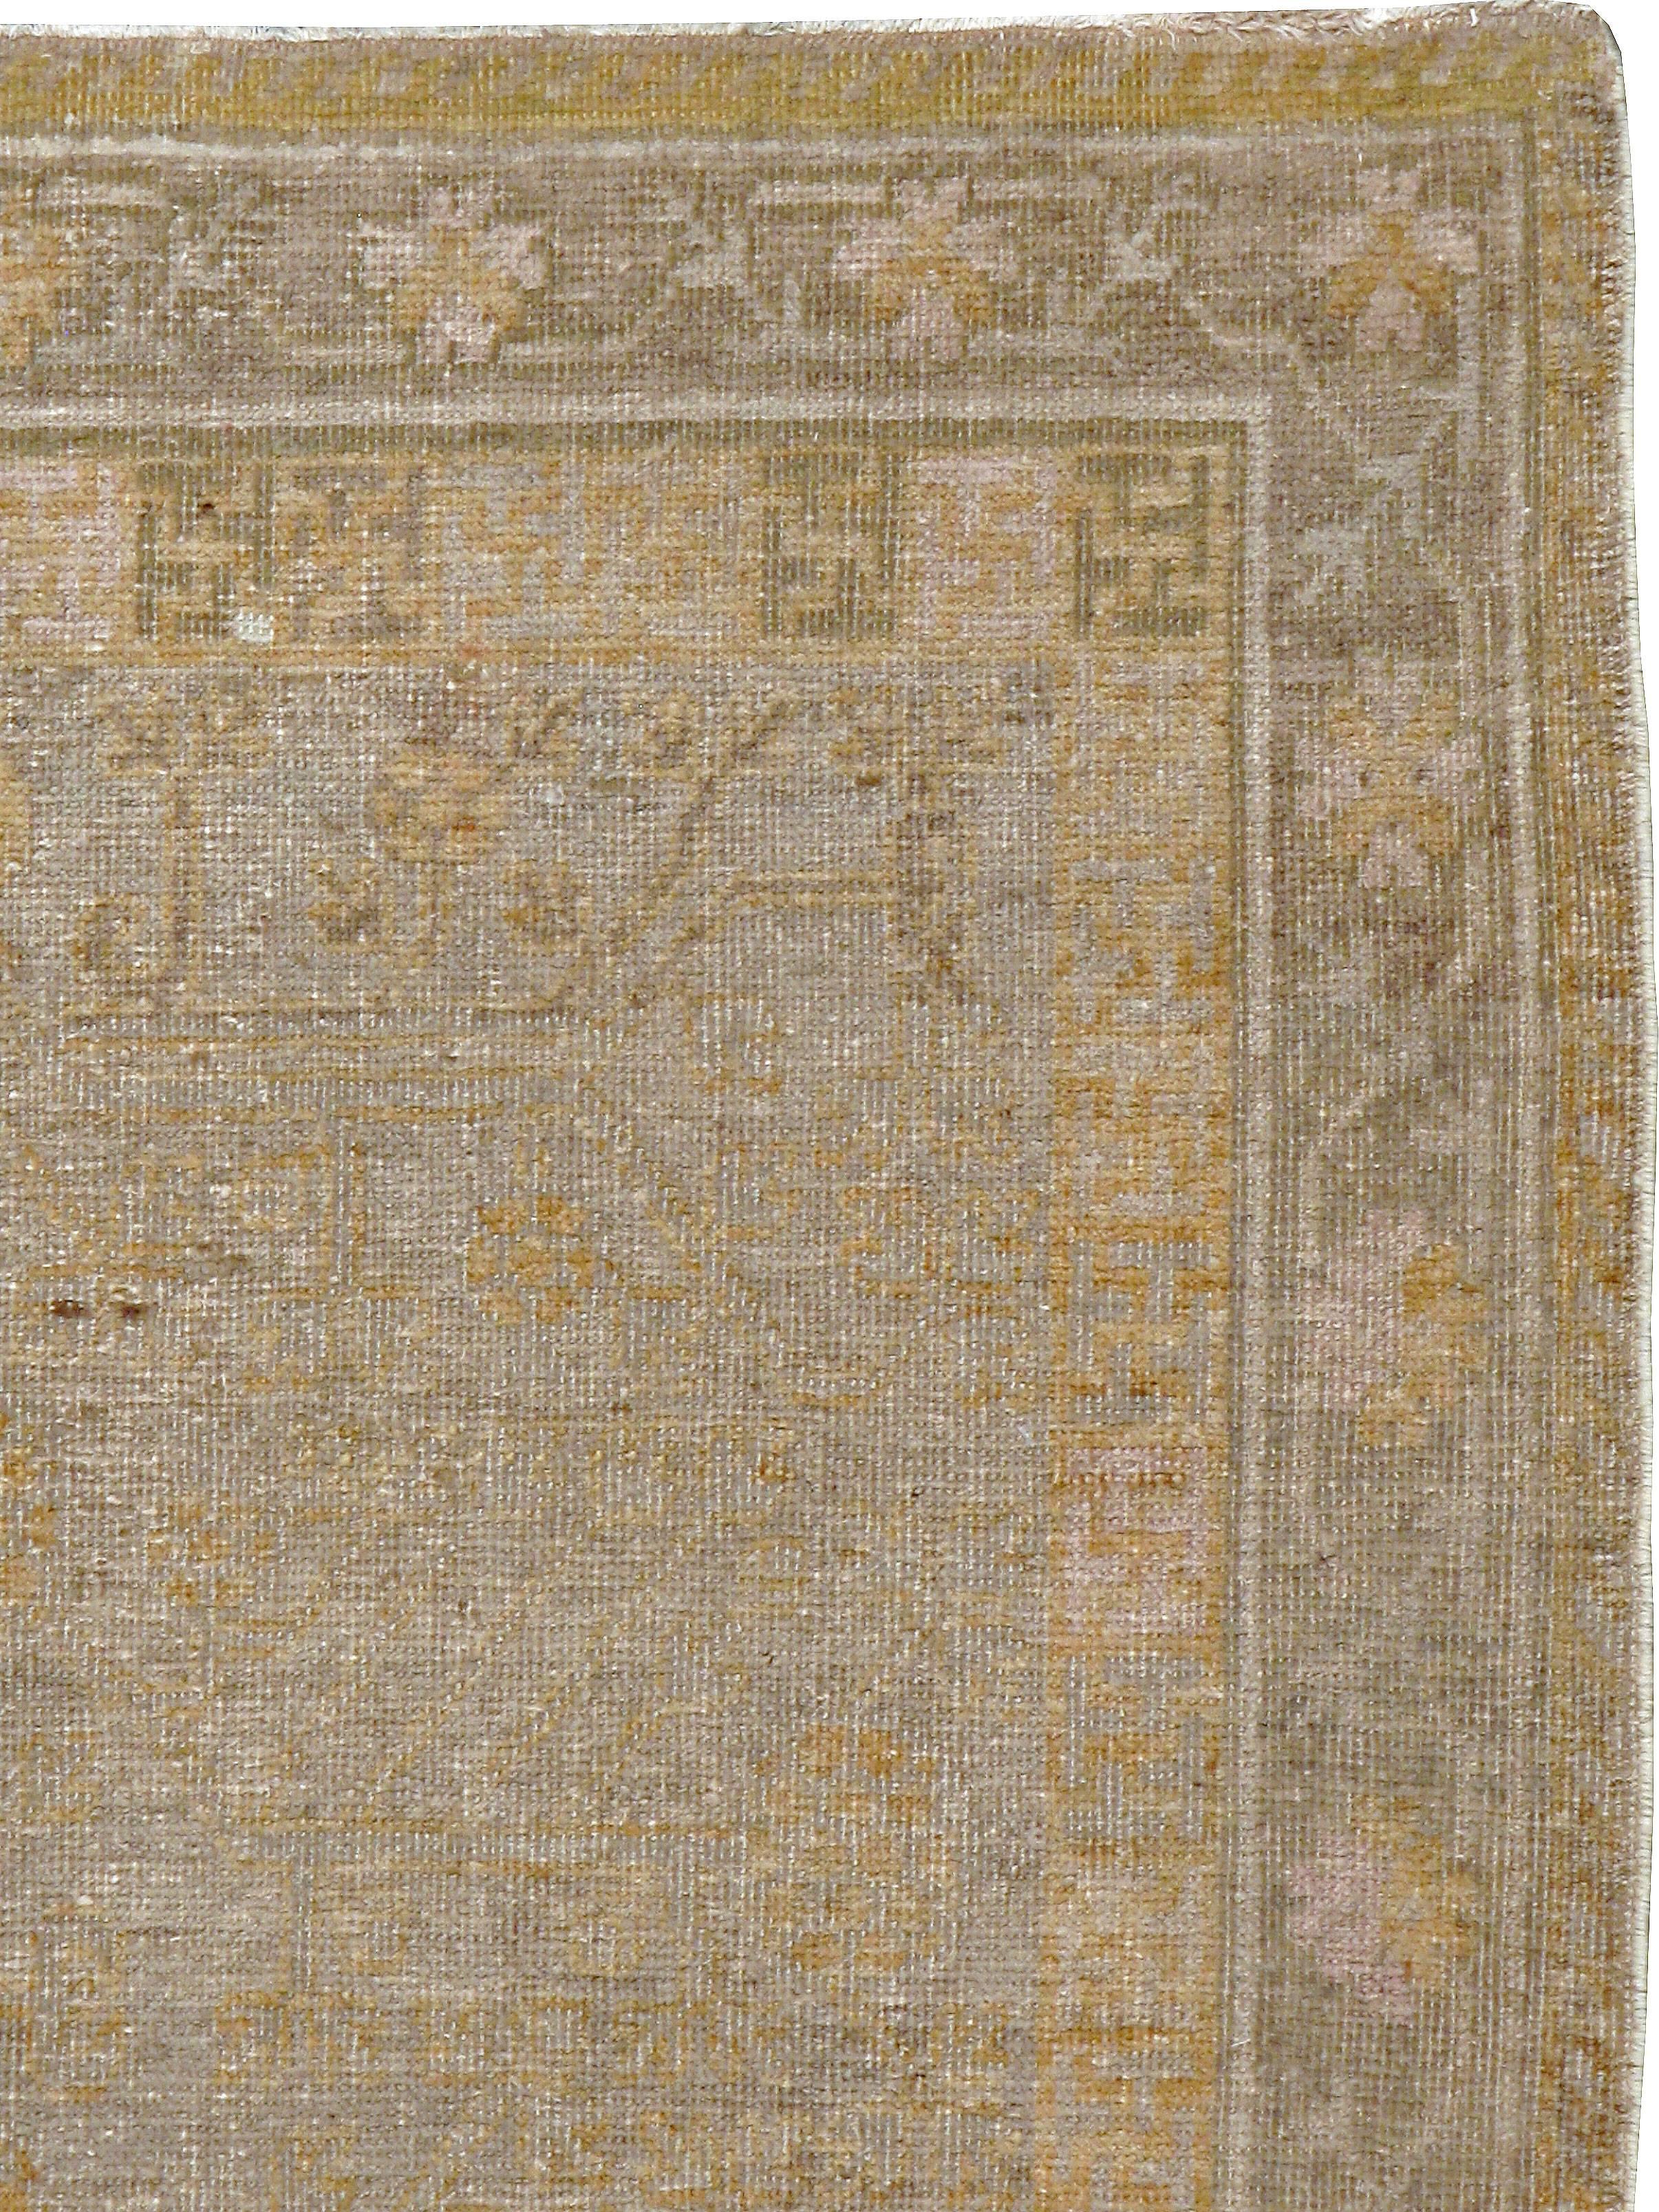 An antique East Turkestan Khotan carpet from the first quarter of the 20th century.